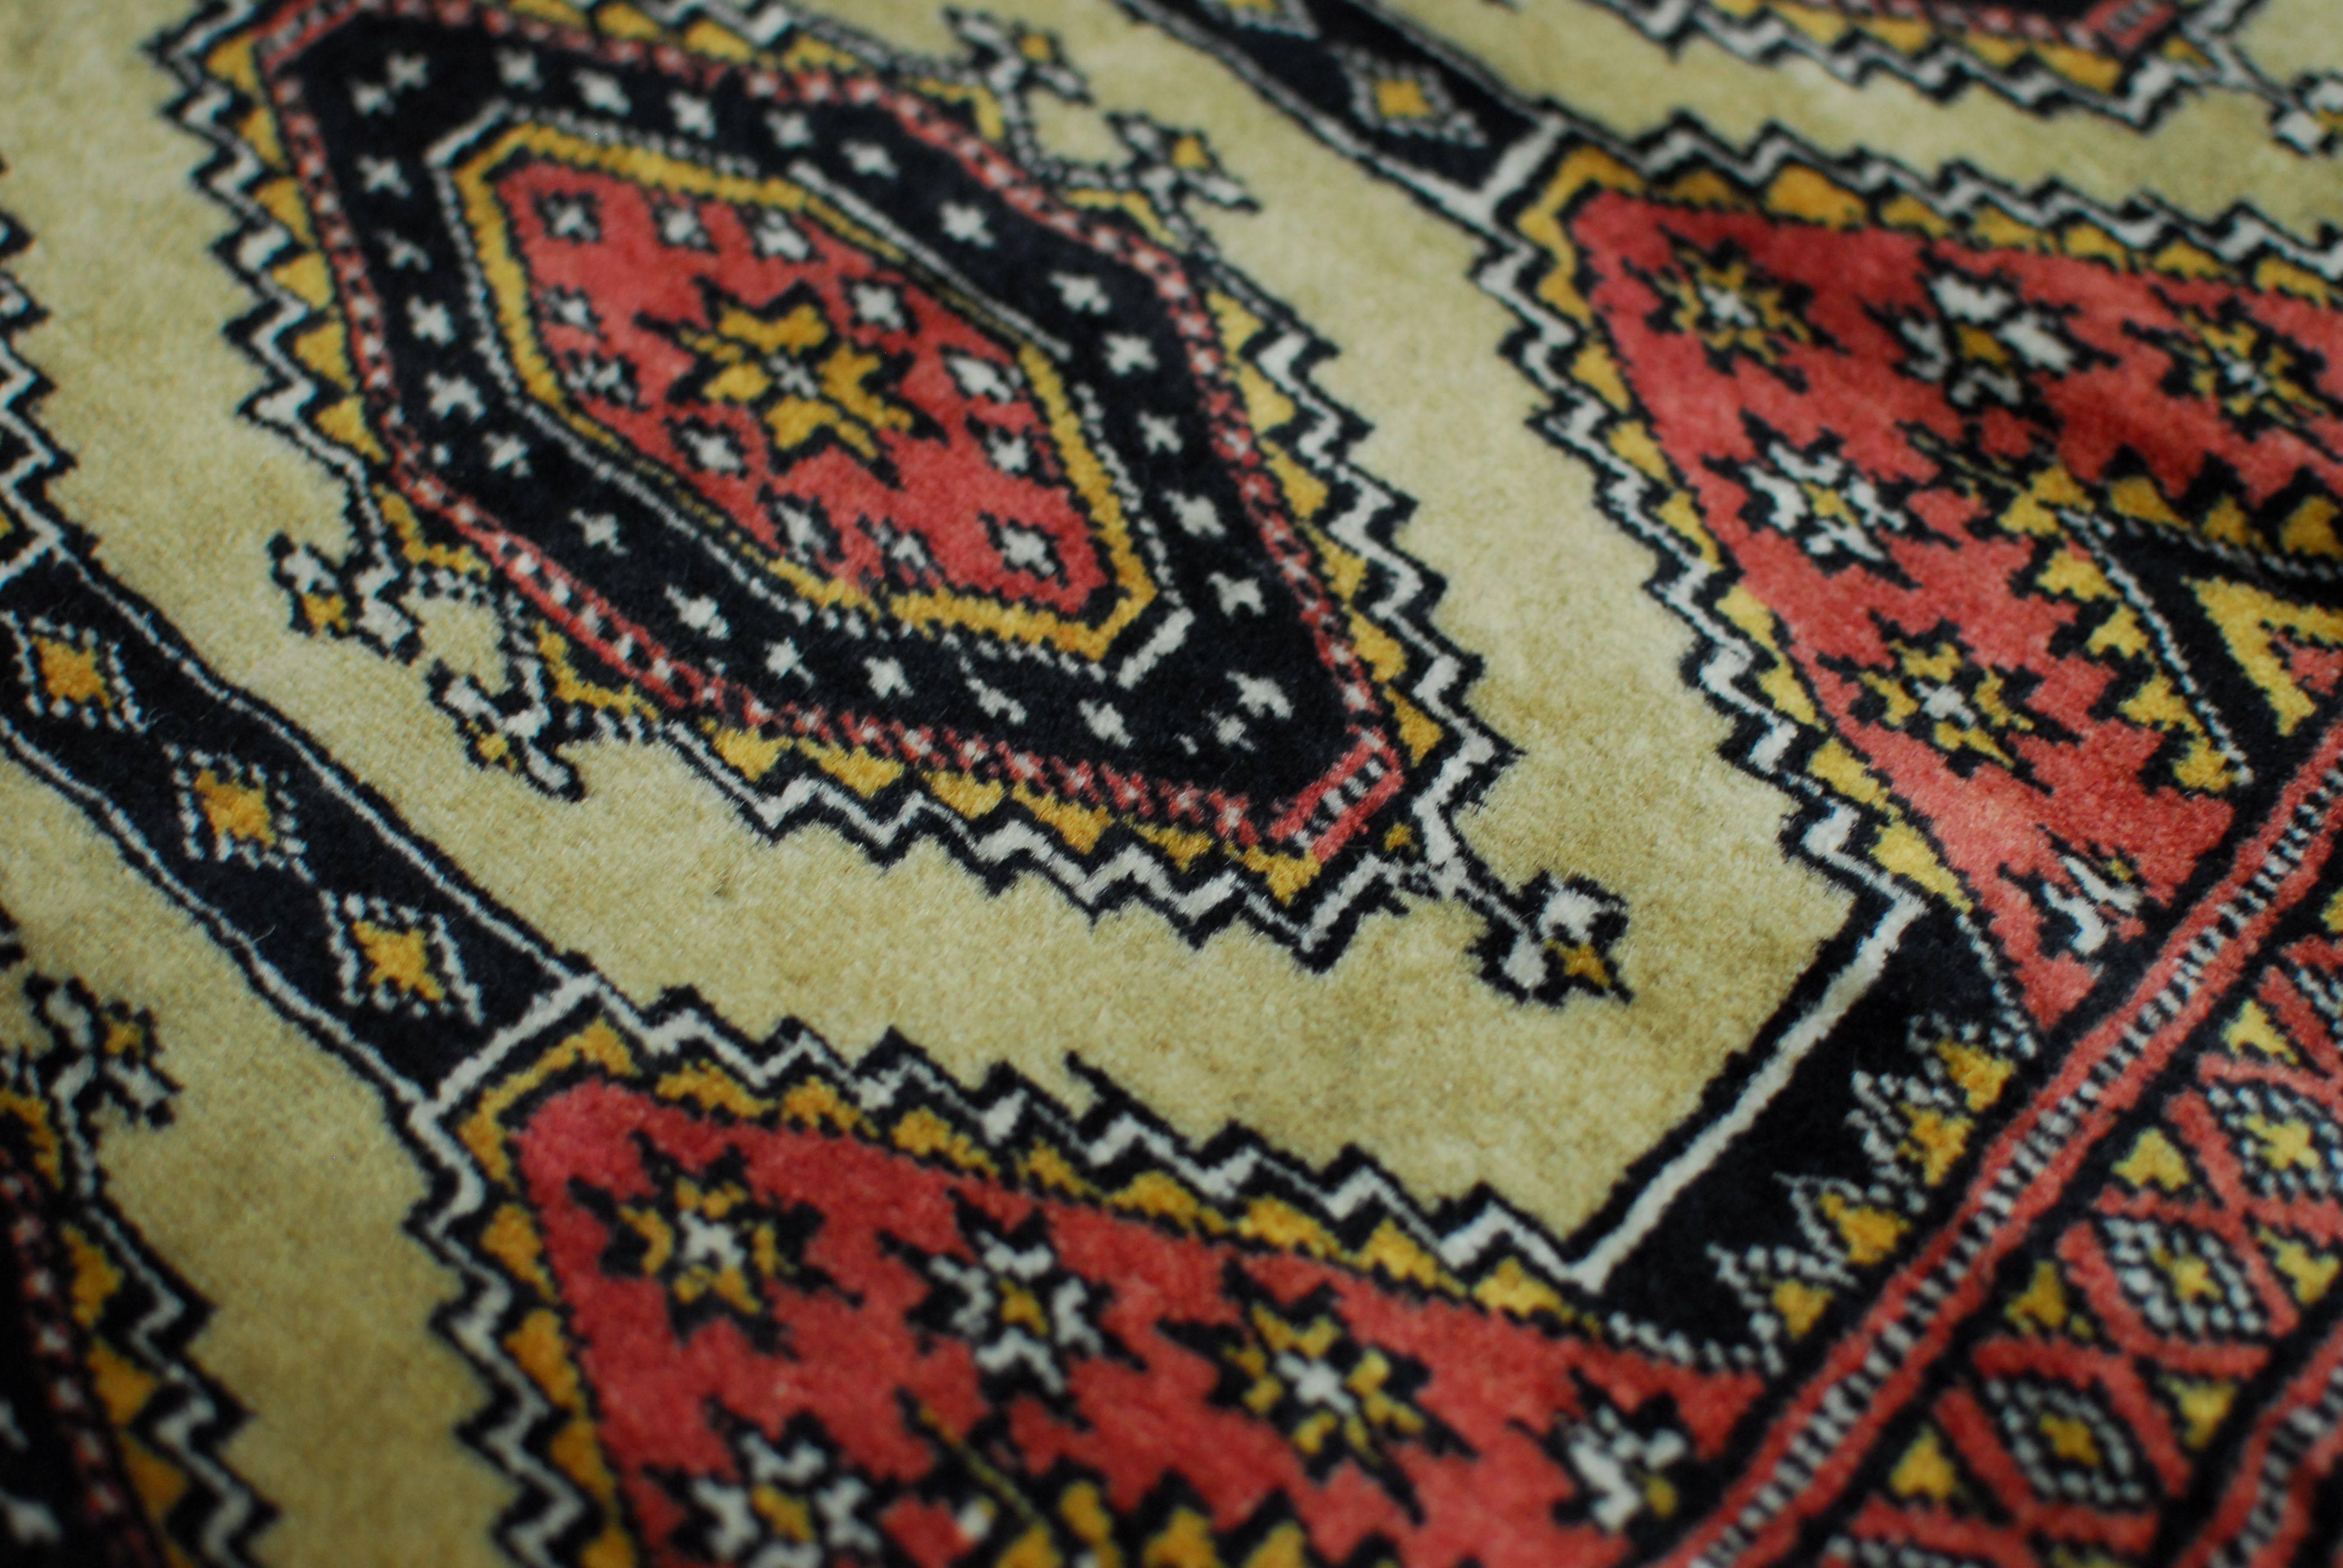 Exquisite Pakistani Bokara carpet woven with a high knot density and intricate geometric patterns over a rare black background. Low pile with a very soft velvety feel.
